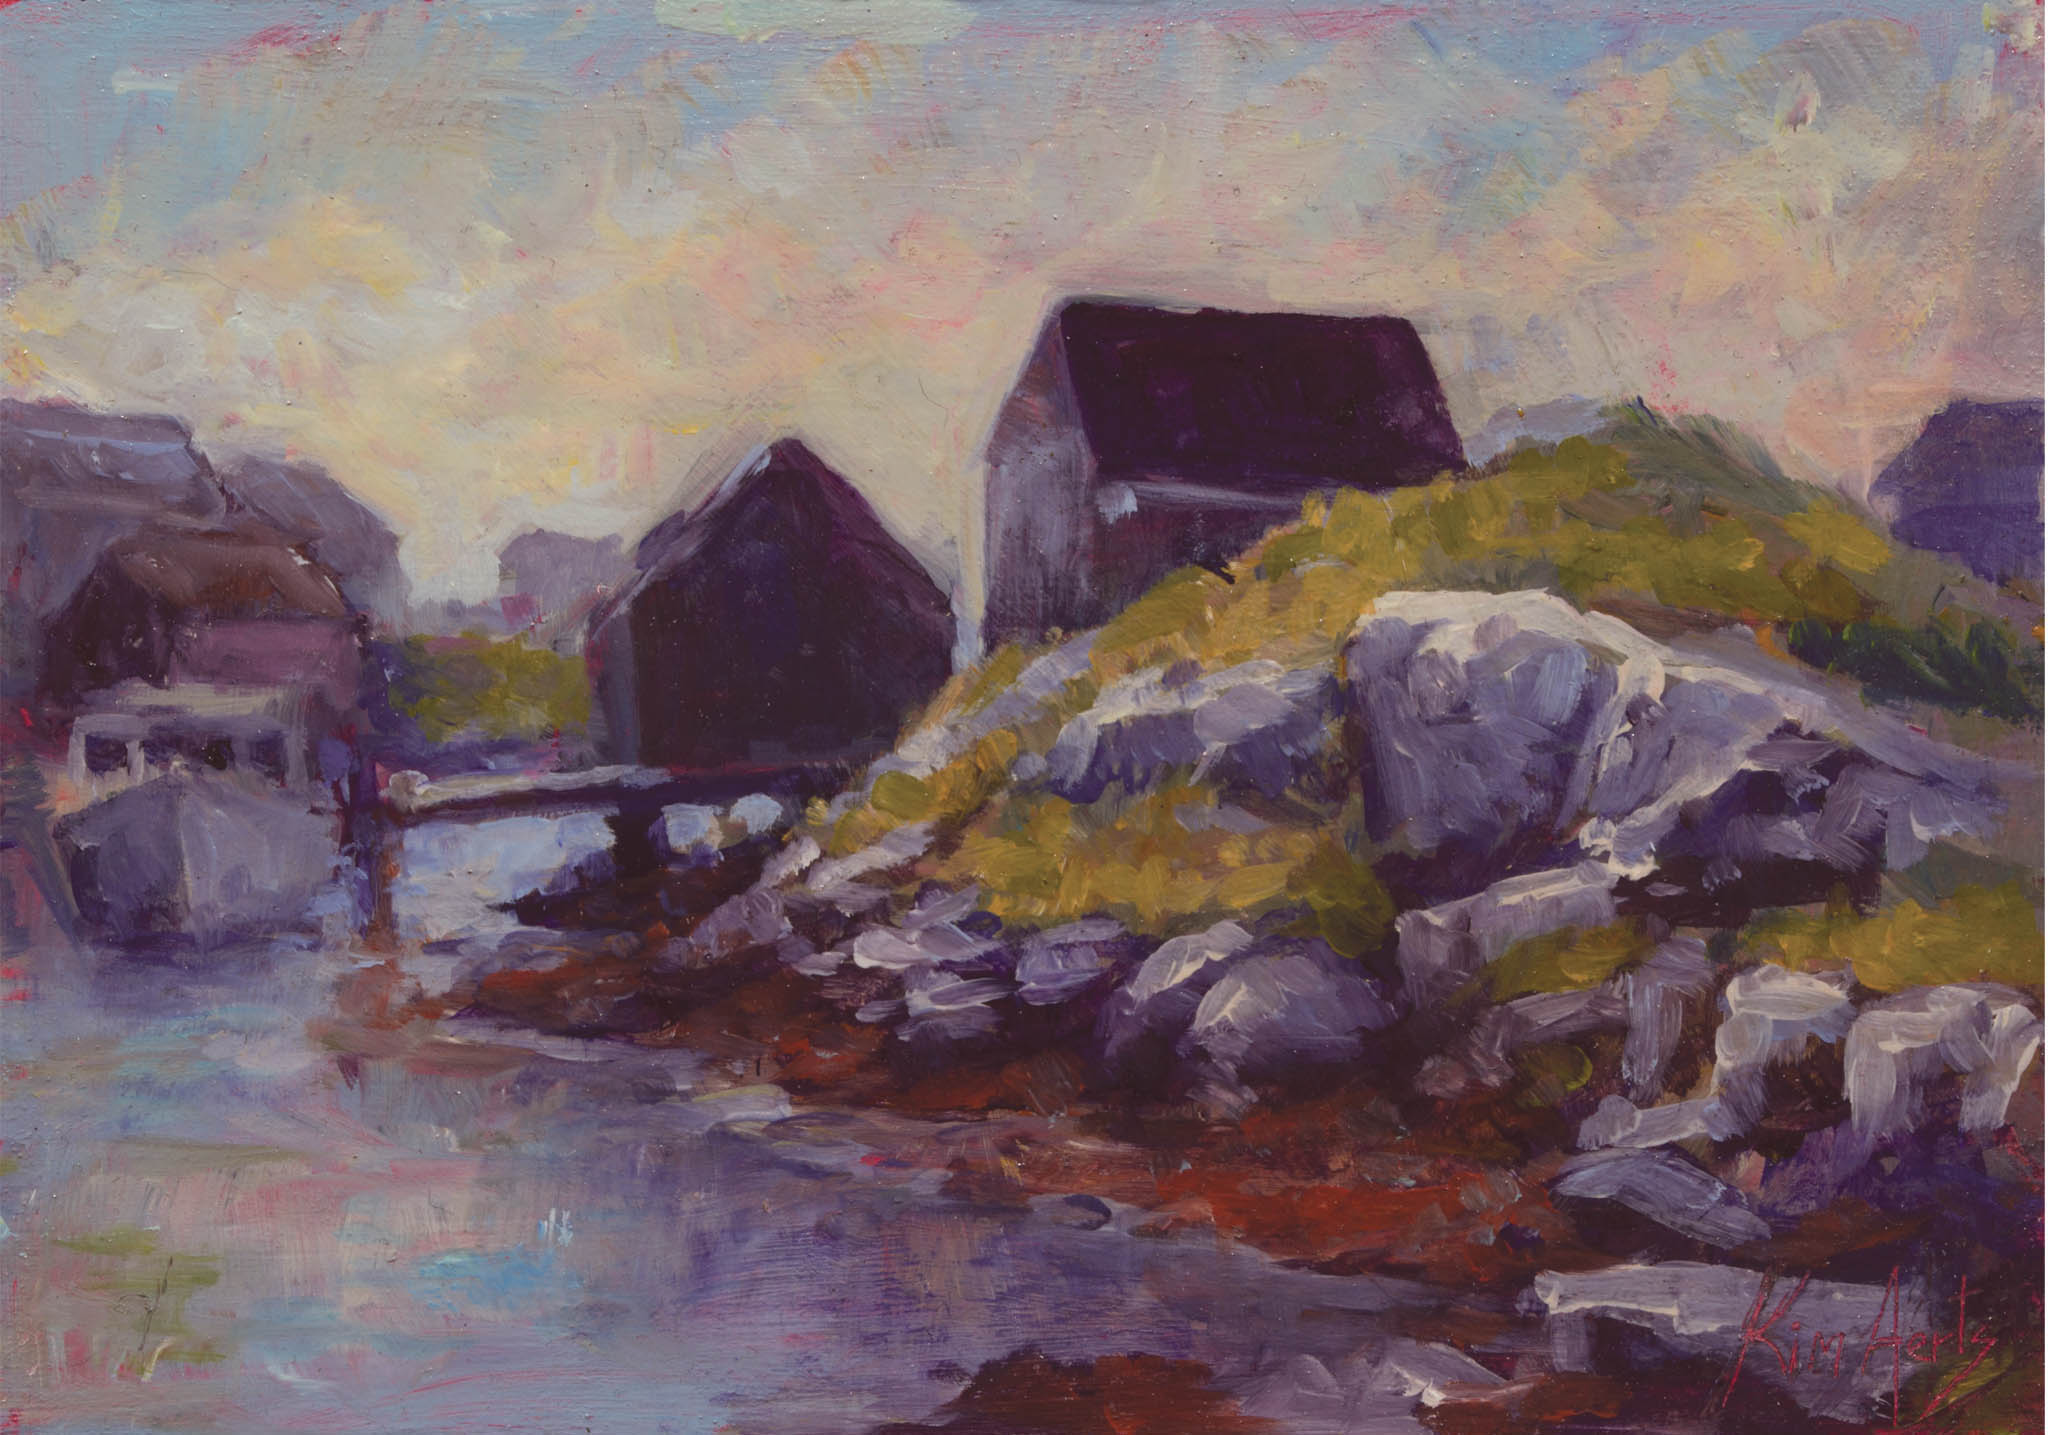 Peggy's Cove, early morning - oil on wood - Kim Aerts